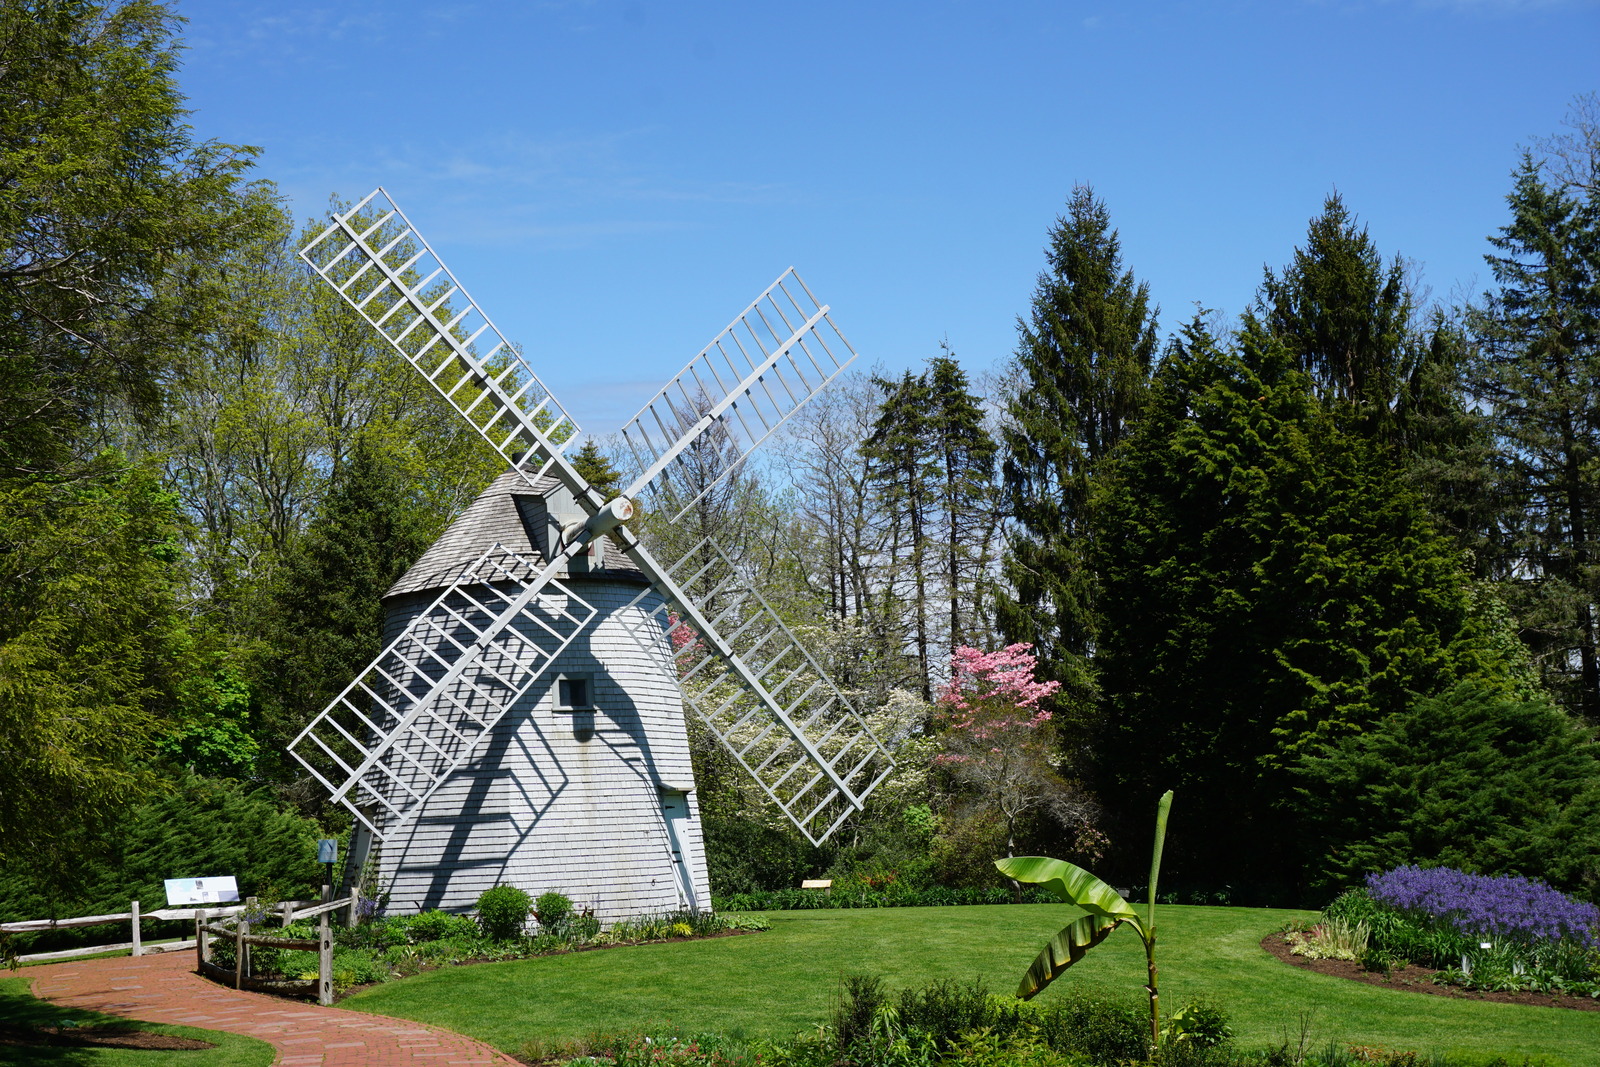 The Old East Windmill